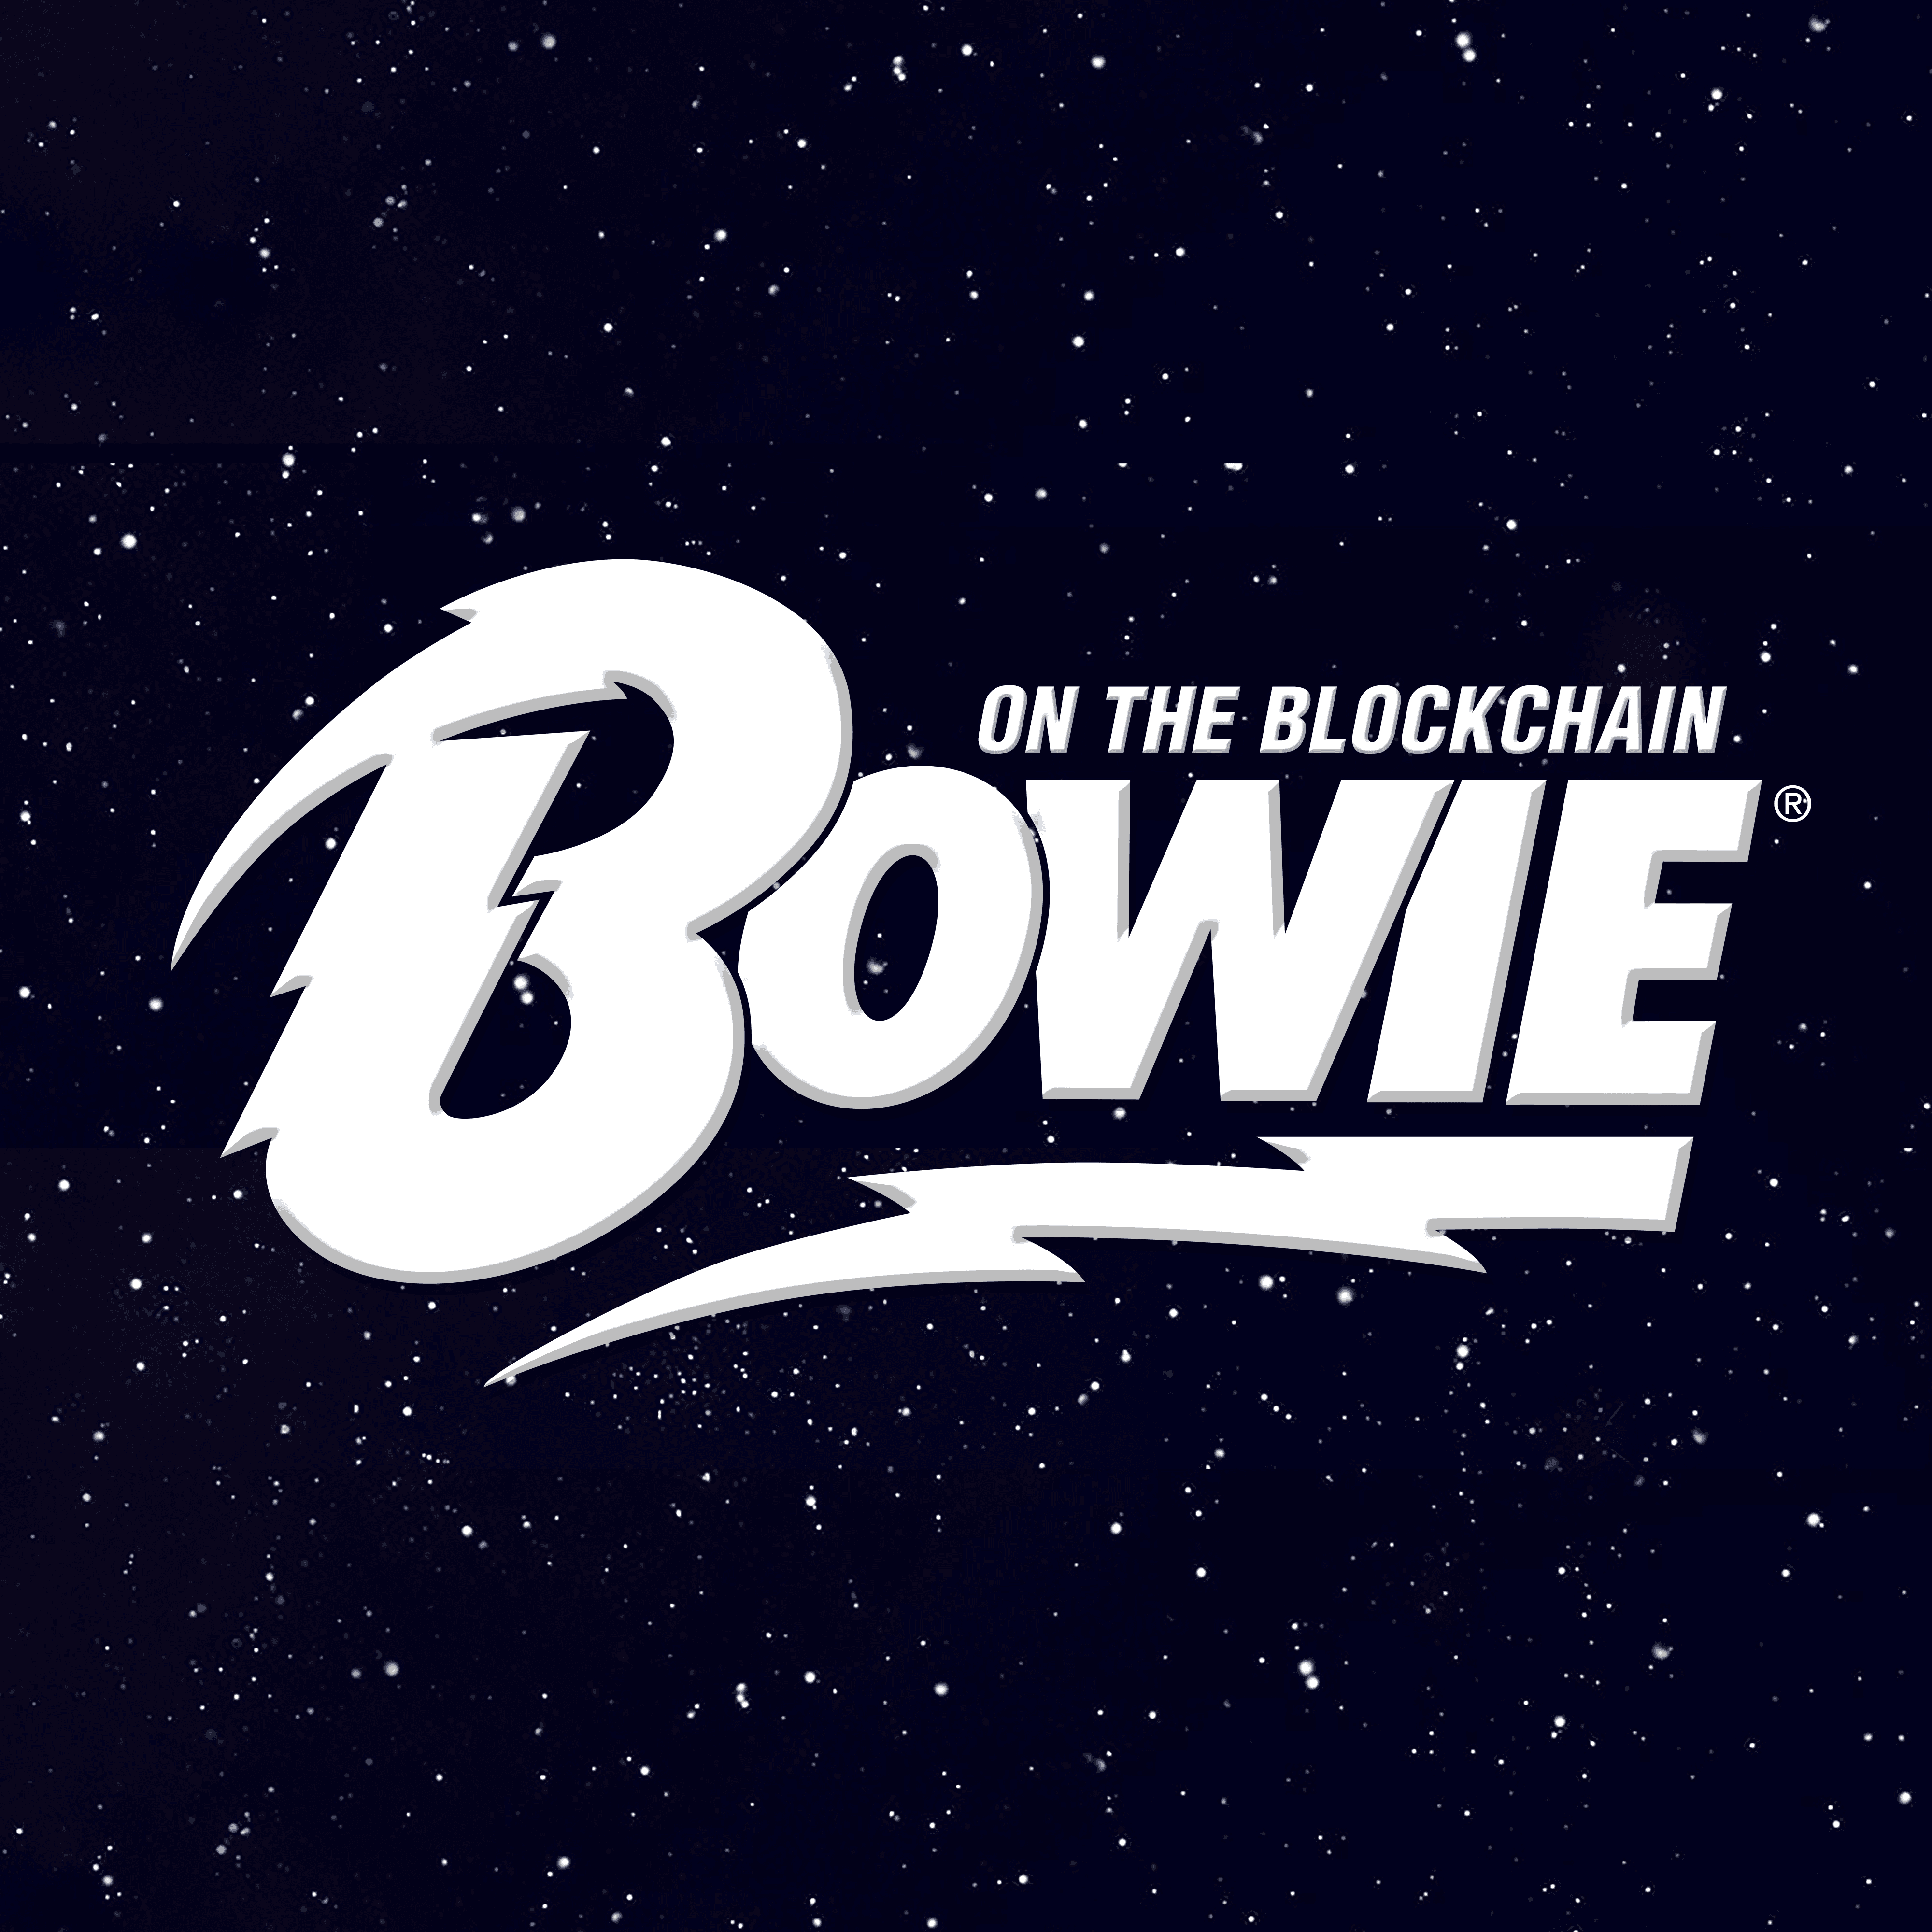 Bowie on the Blockchain